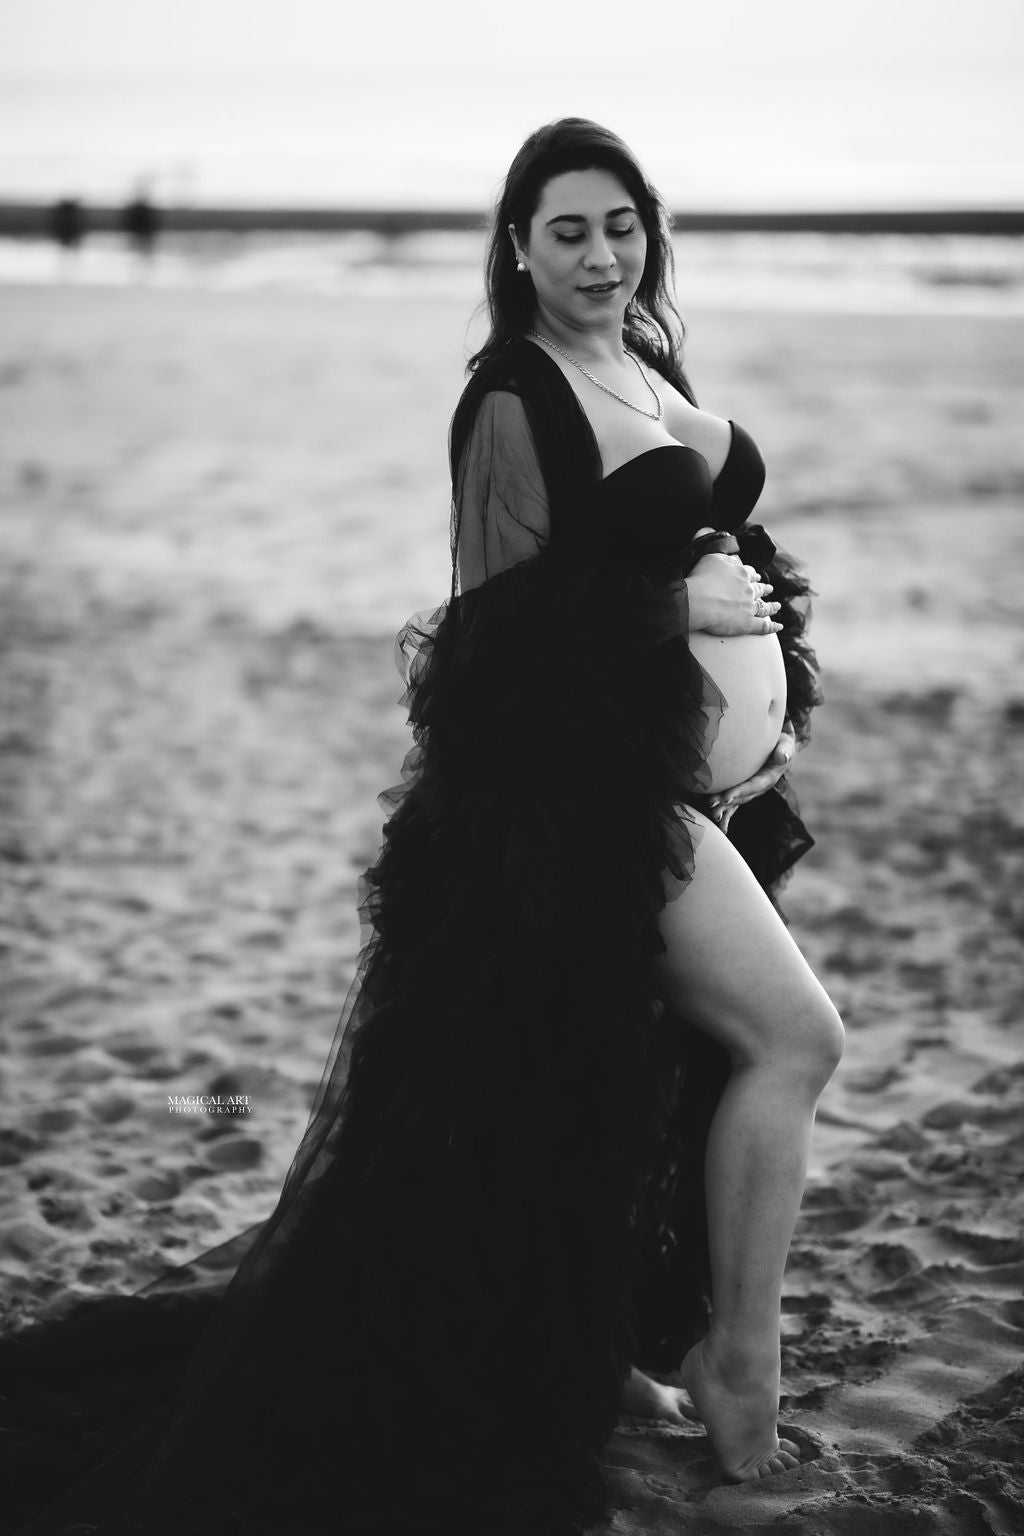 Maternity Photoshoot Dresses - Black Tulle Robe - Sophie - Luxe Bumps AU